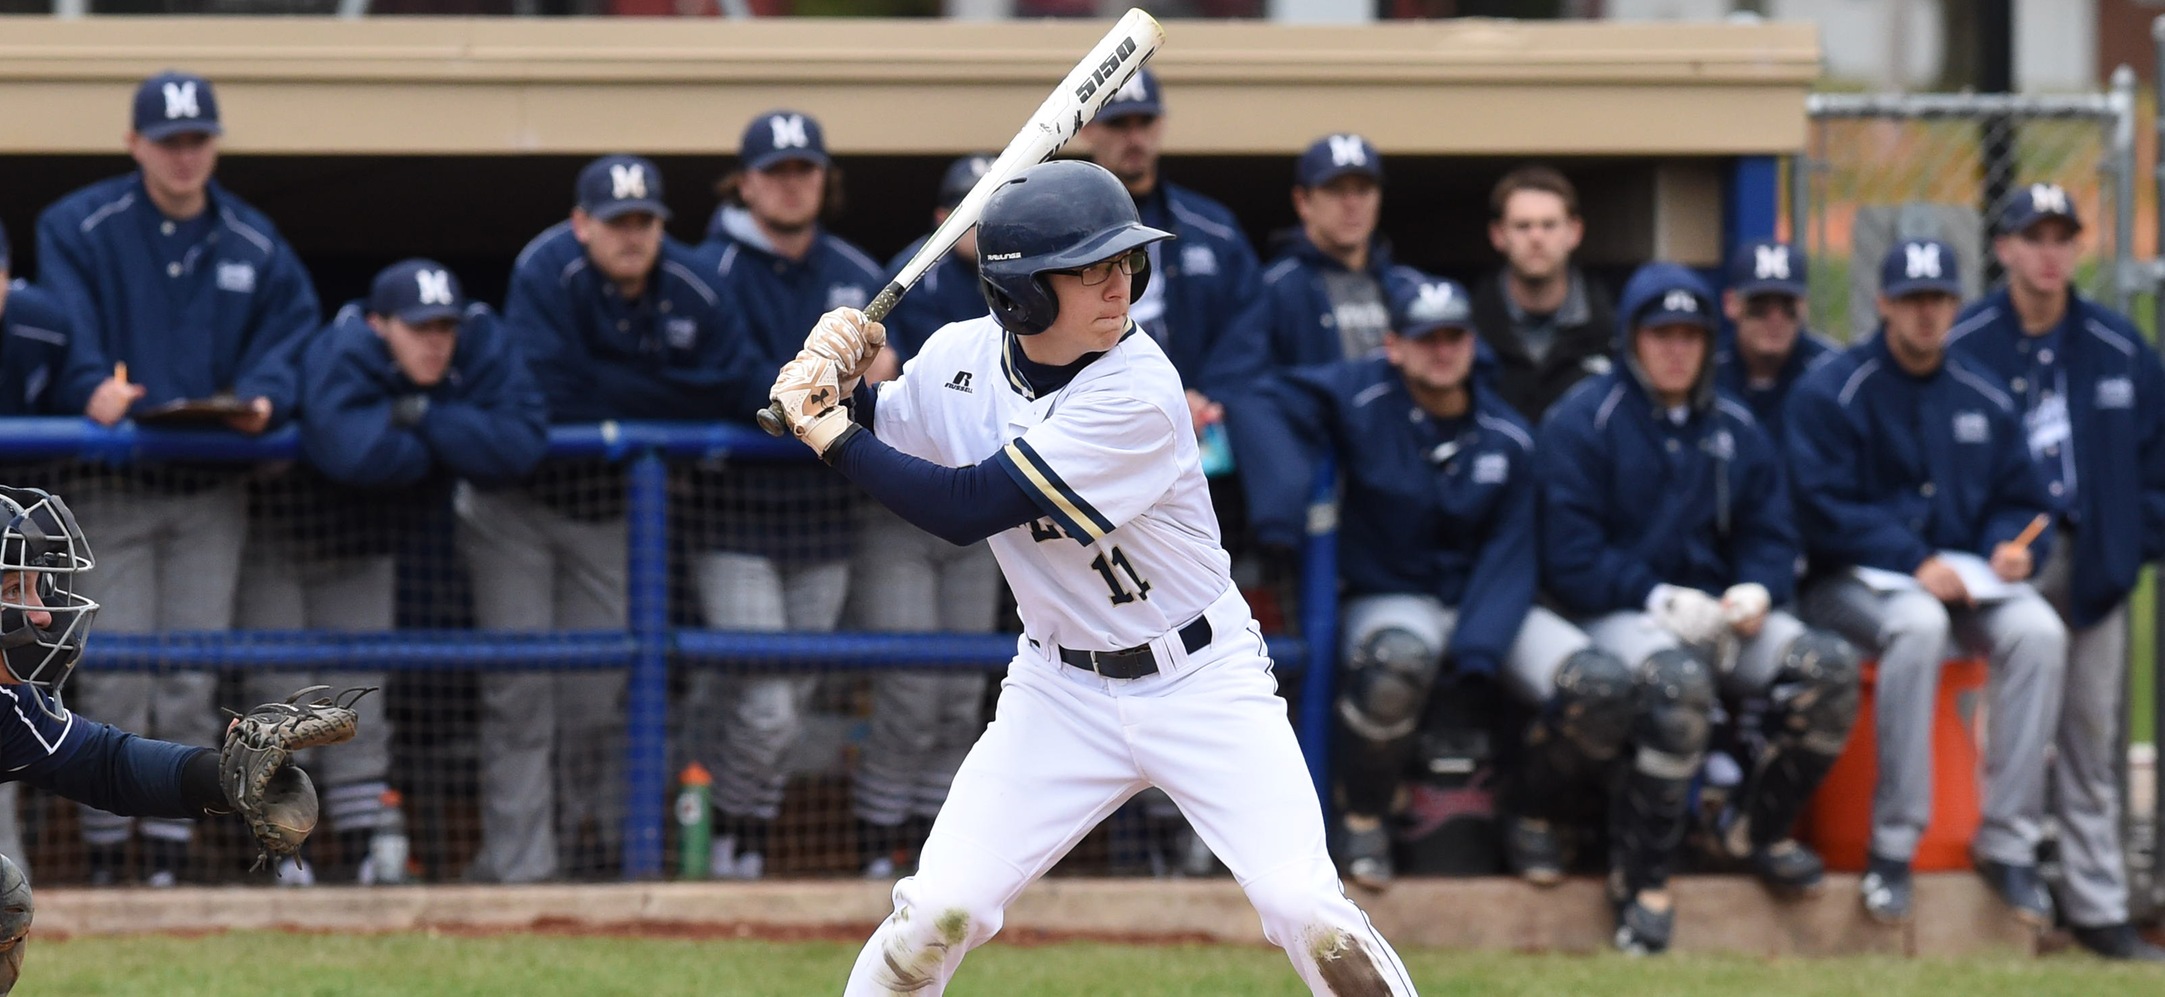 Eagles Edged by Centre, 8-7